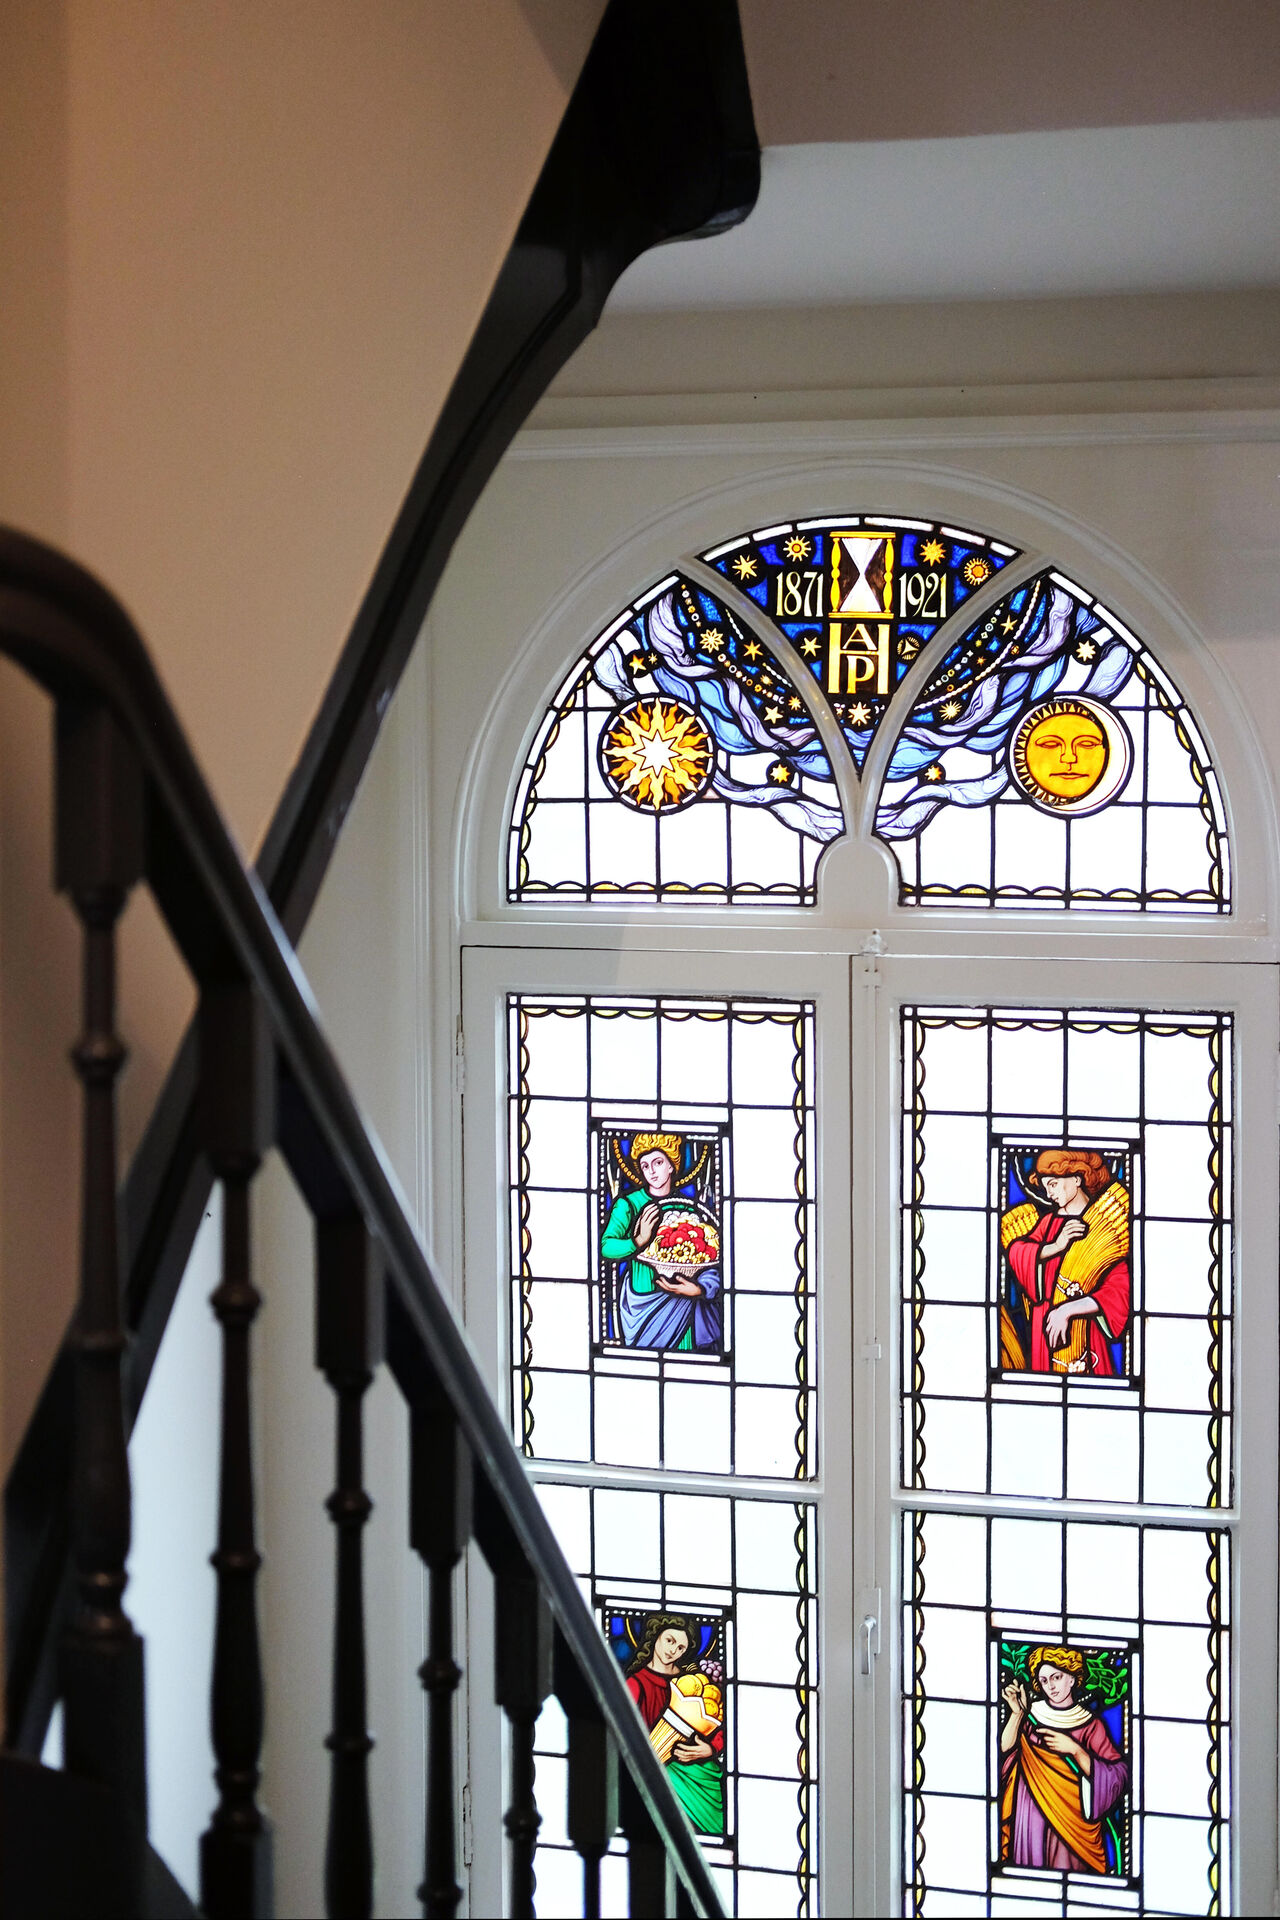 Colour use renovated staircase aligned with the stained glass windows